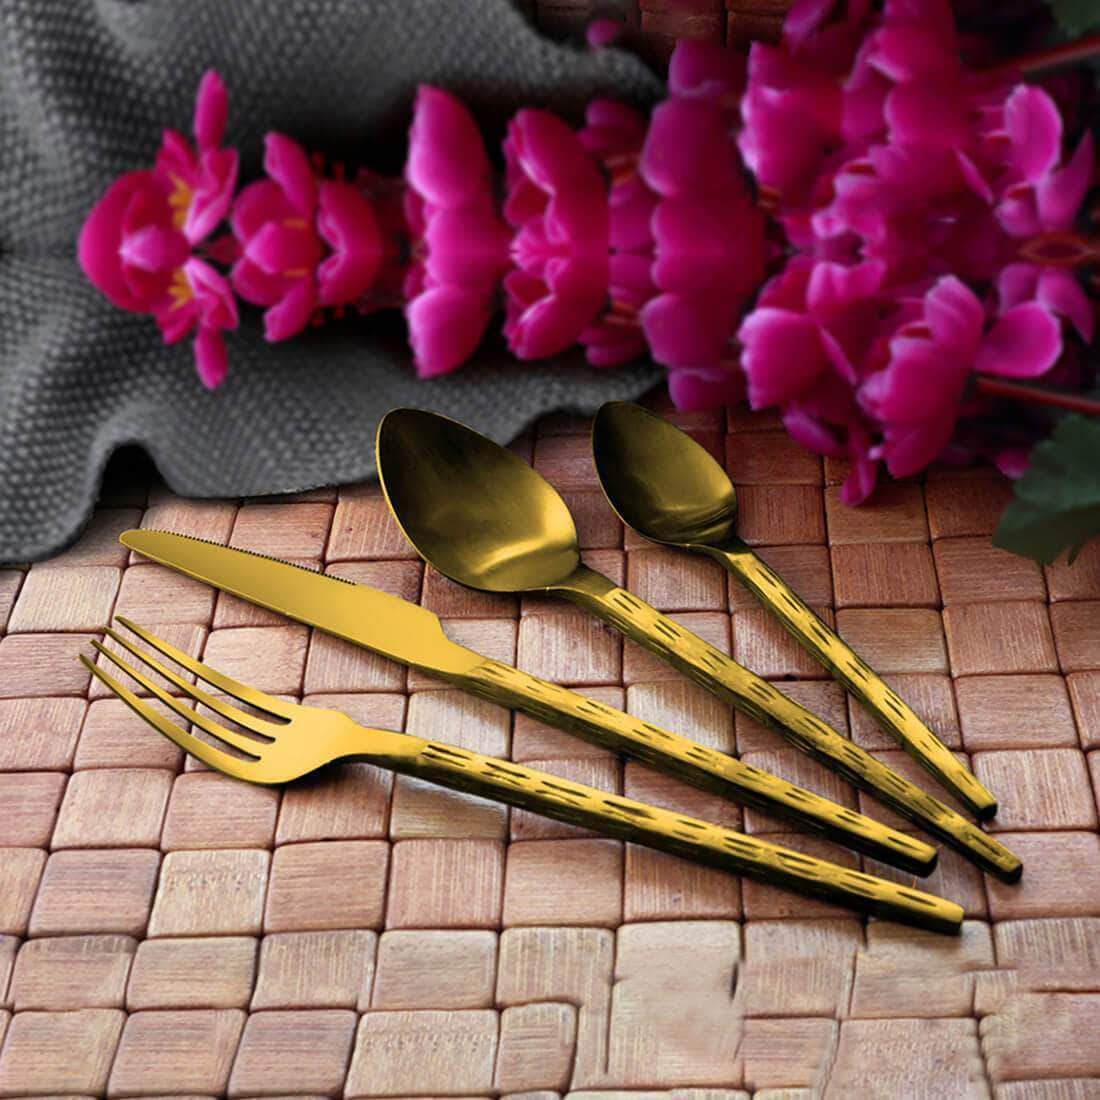 Jagdamba Cutlery Pvt Ltd. Cutlery Black 24 PCS Cutlery Set with PVD Coating - Rod Rice Hammered - Hand Crafted